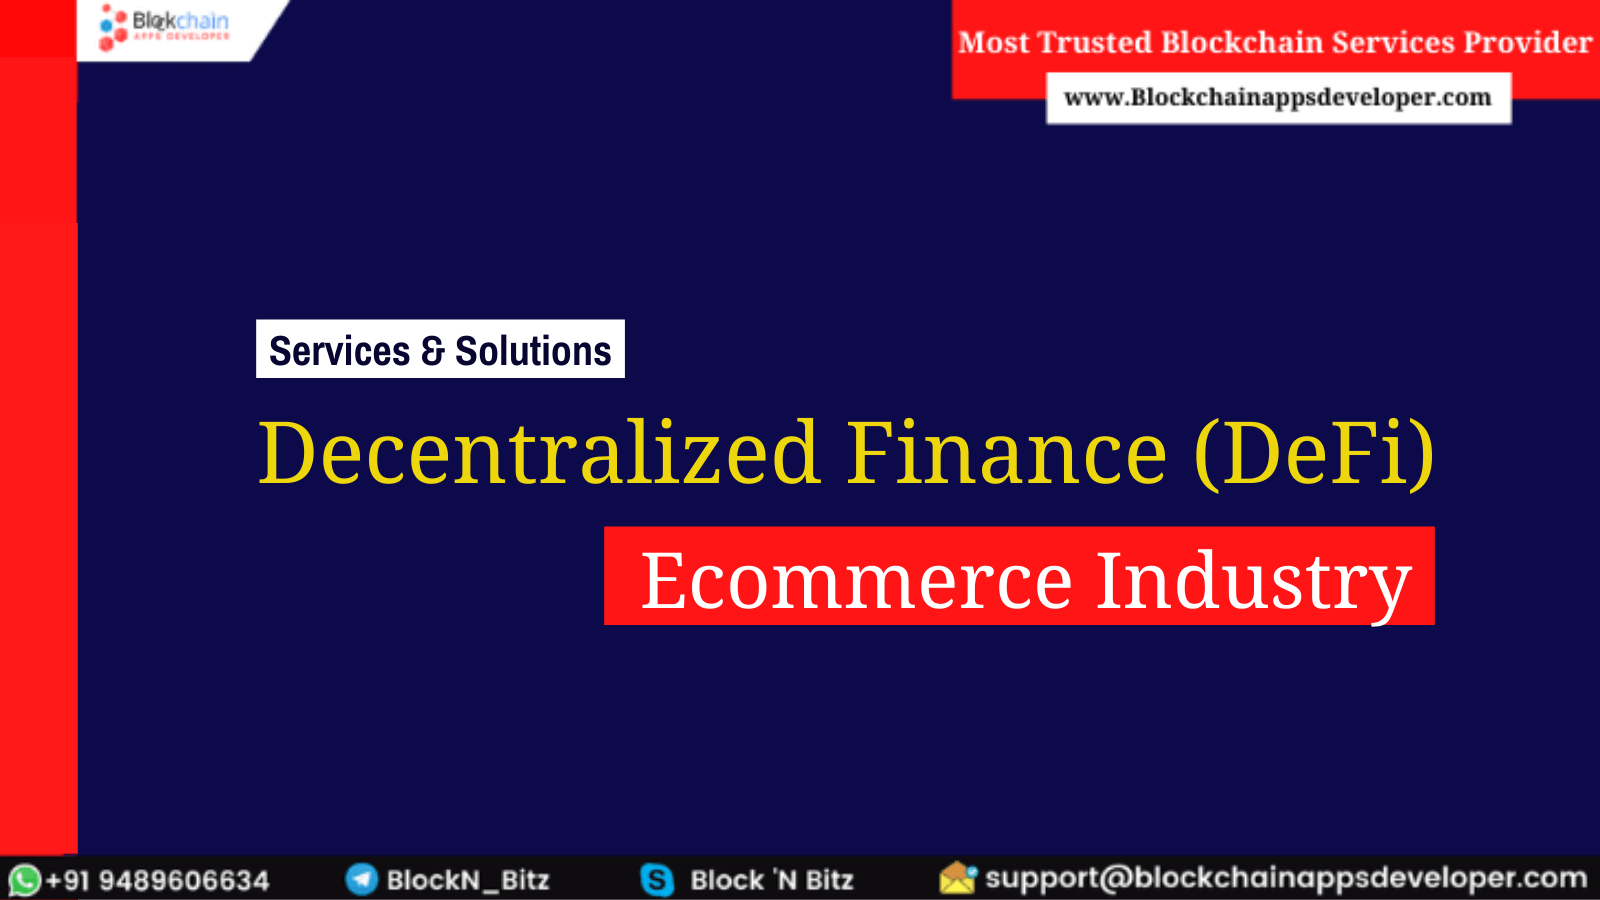 How Decentralized Finance (DeFi) can improve the E-commerce Sector?